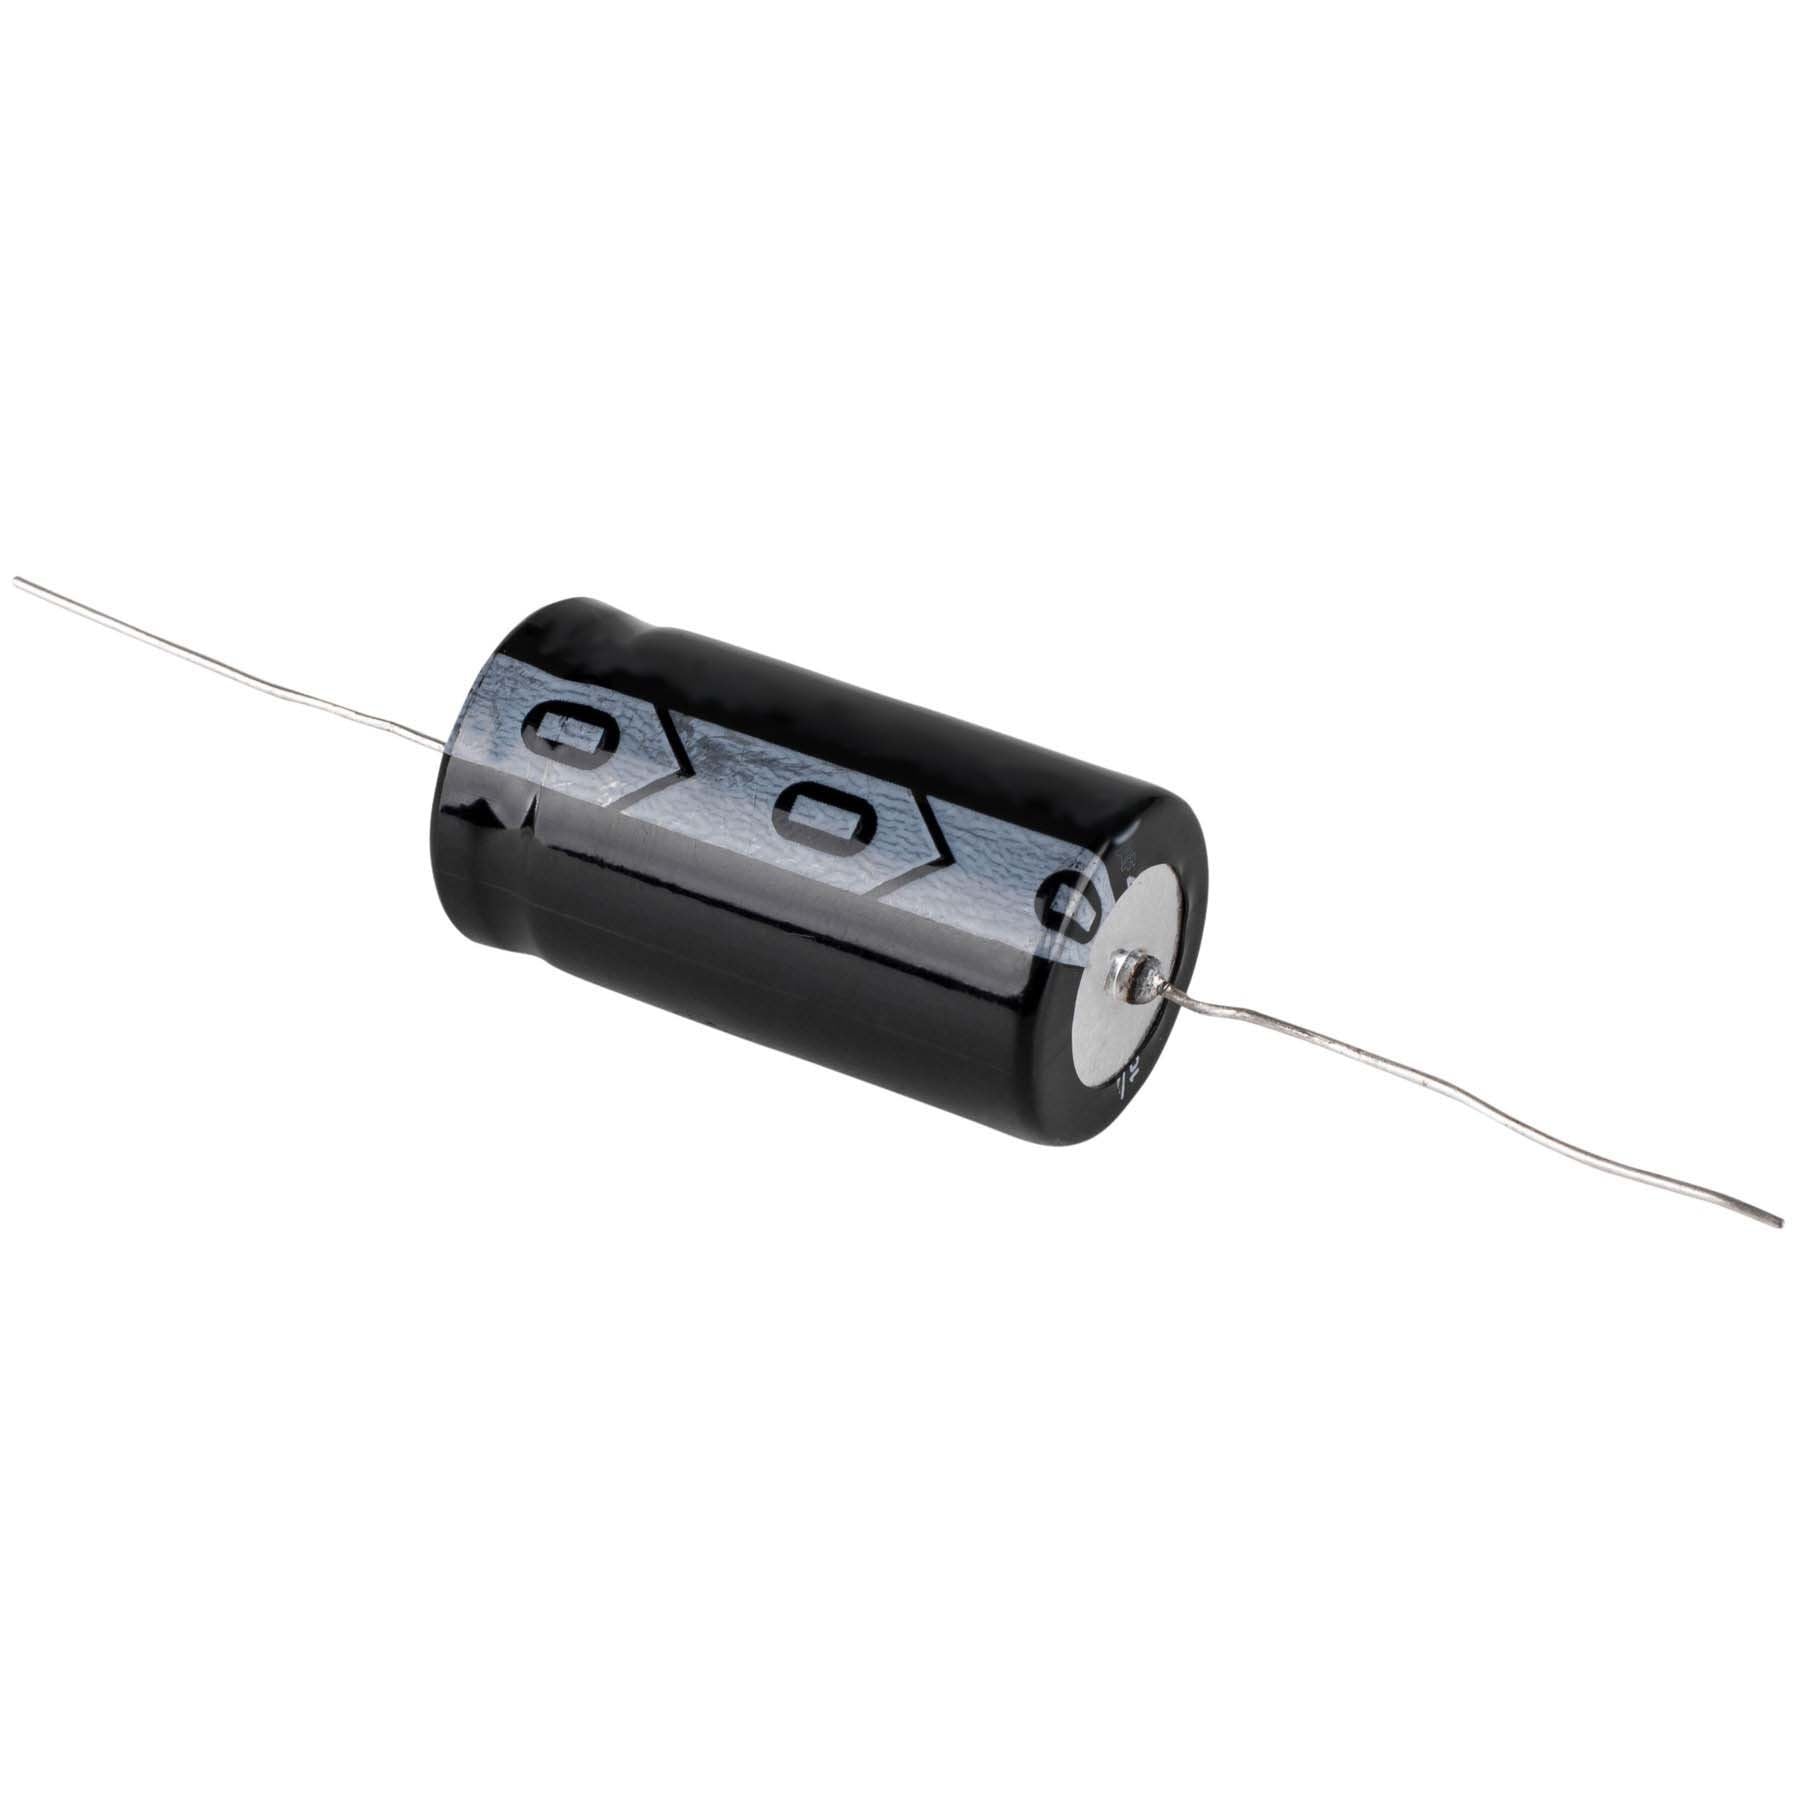 Electrolytic Axial Lead Capacitor 35V 3,300µF